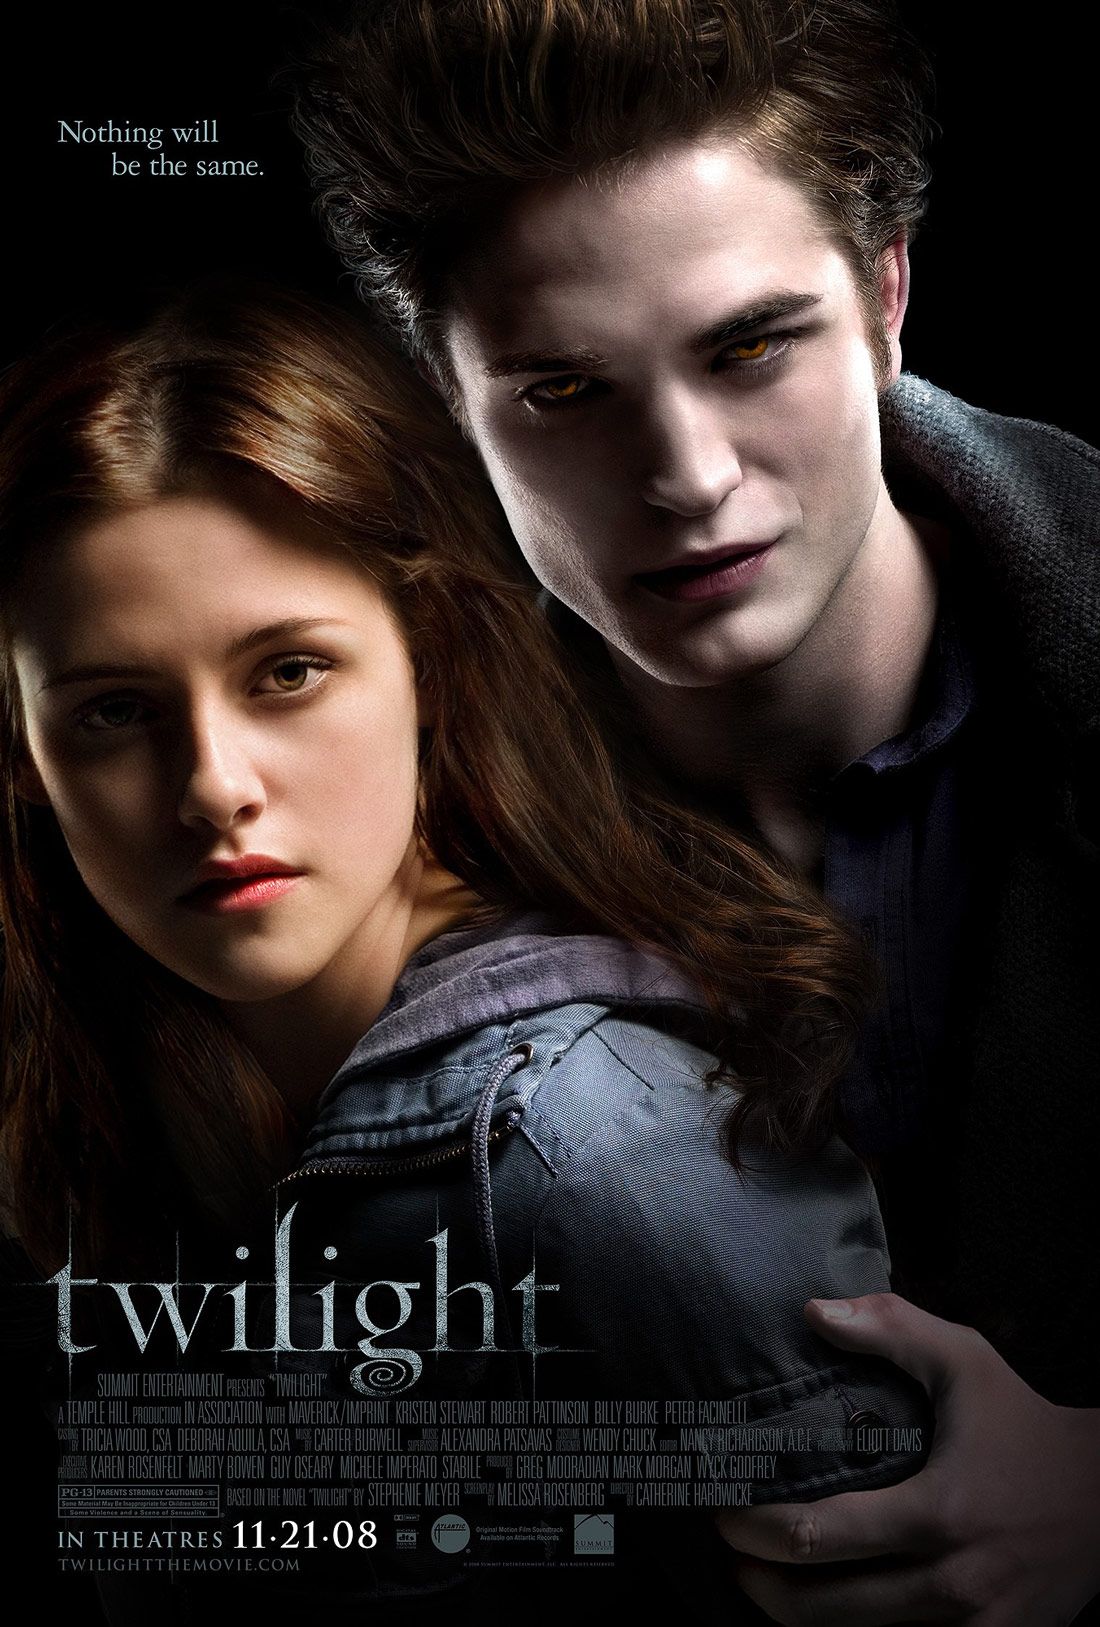 The first two films in the Twilight Saga will be screened outdoors on June 26thIn celebration of the lunar eclipse on the evening of June 26th, Summit Entertainment is inviting everyone across the nation to {0} Night, a 12-city event including outdoor screenings of {1} and {2}. The family and community-oriented events are the perfect chance for those new to the film franchise as well as moviegoers in general to immerse themselves in {3} phenomenon just in time for the highly anticipated theatric